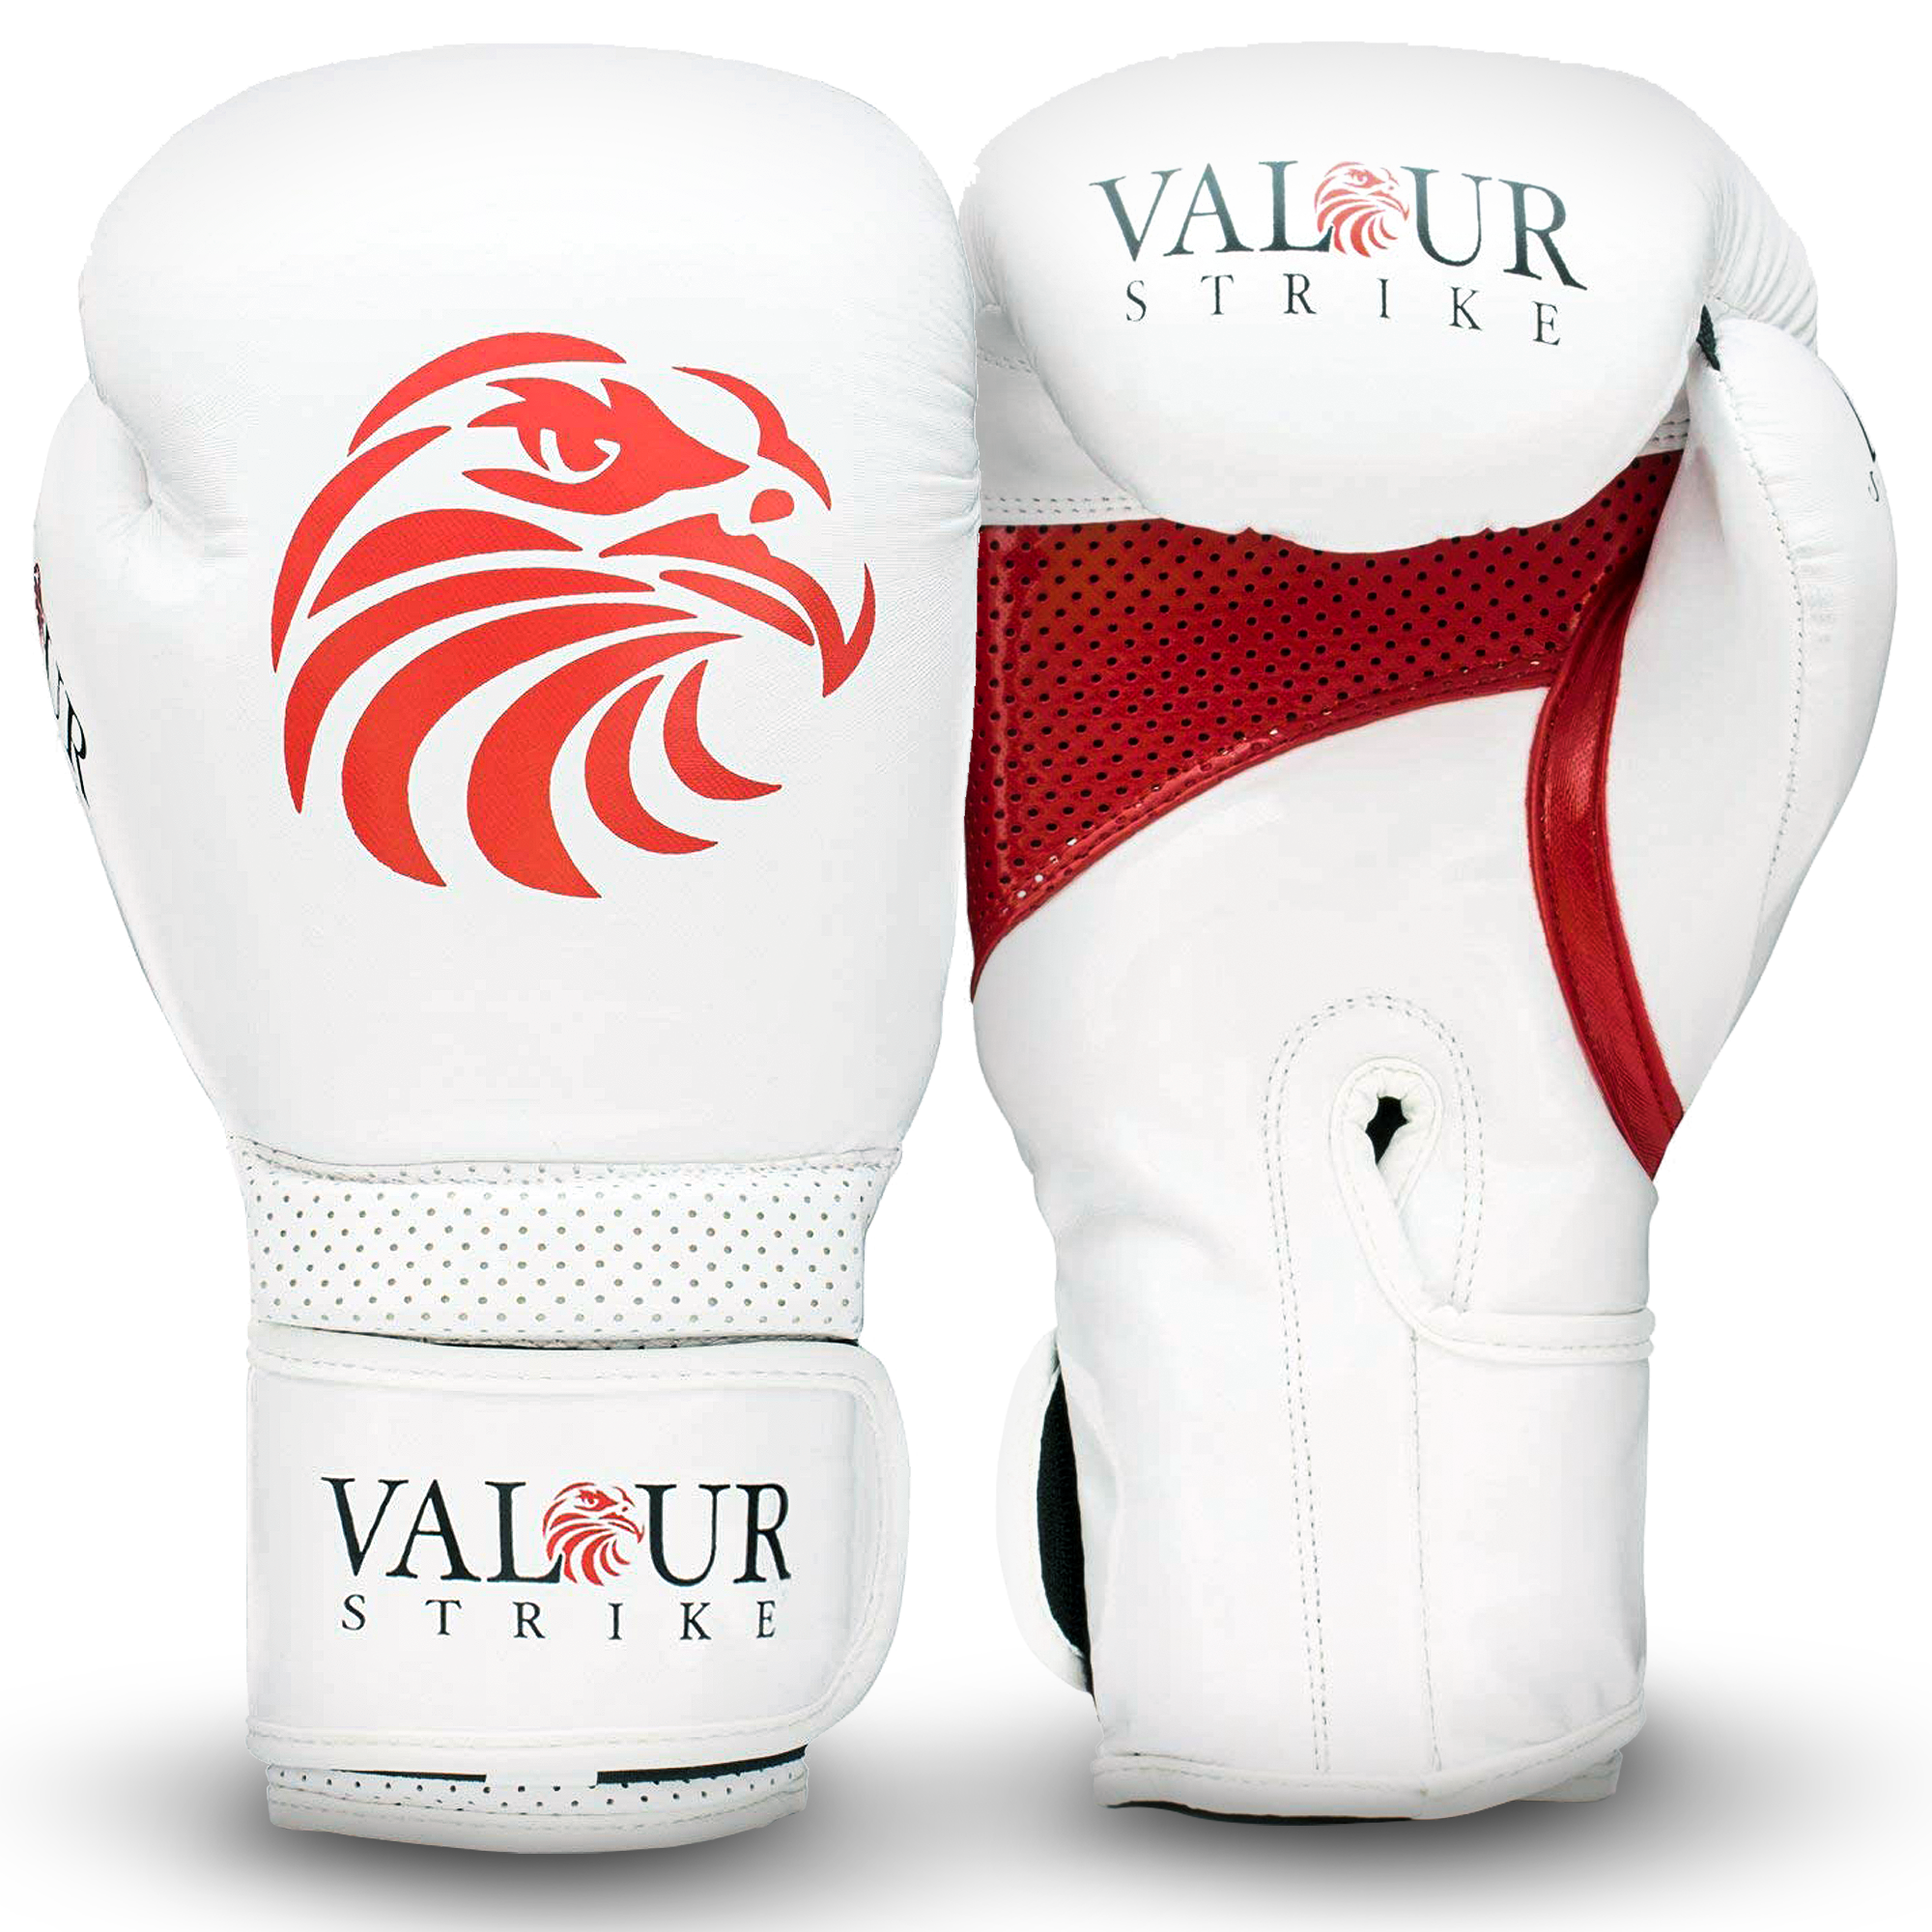 Valour Strike Boxing Gloves, Black 4oz - 16oz, Suitable for Boxing,  Fighting, MMA, Muay Thai, Martial Arts, Training, Kickboxing, Punching,  Boxers